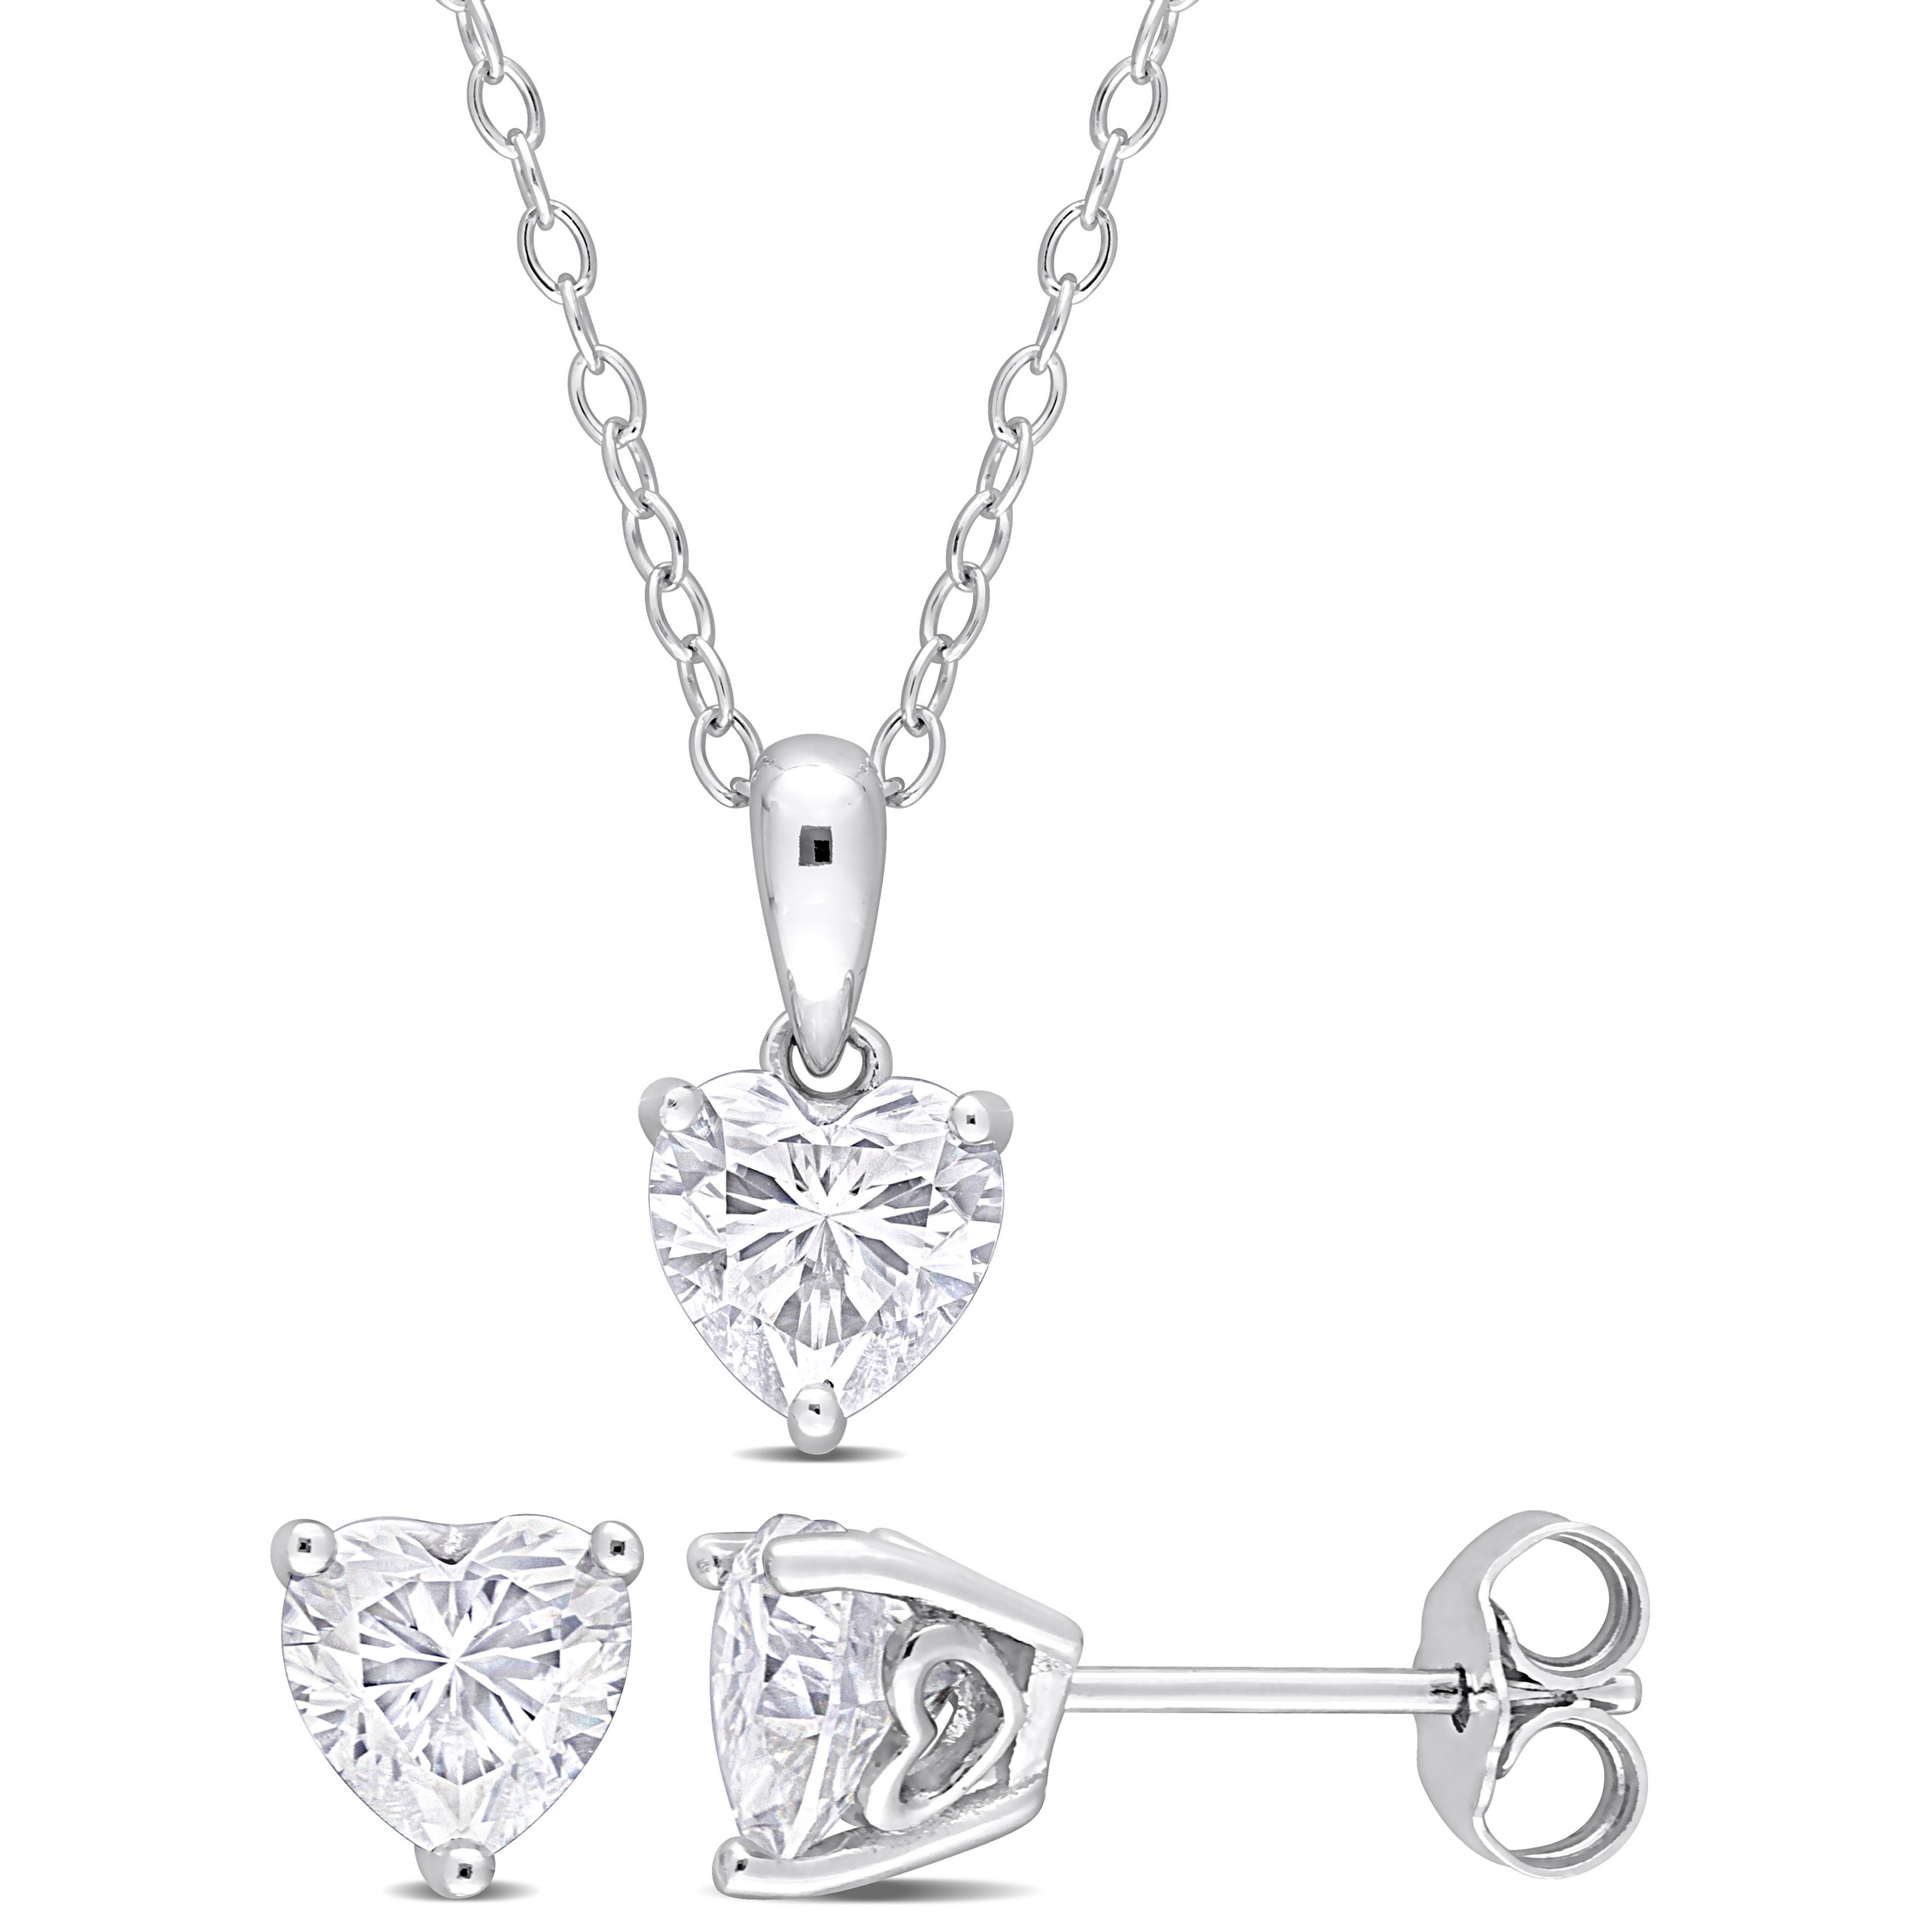 2 1/4 CT TGW Heart-Shape Created Moissanite 2-Piece Solitaire Pendant with Chain and Stud Earrings Set in Sterling Silver